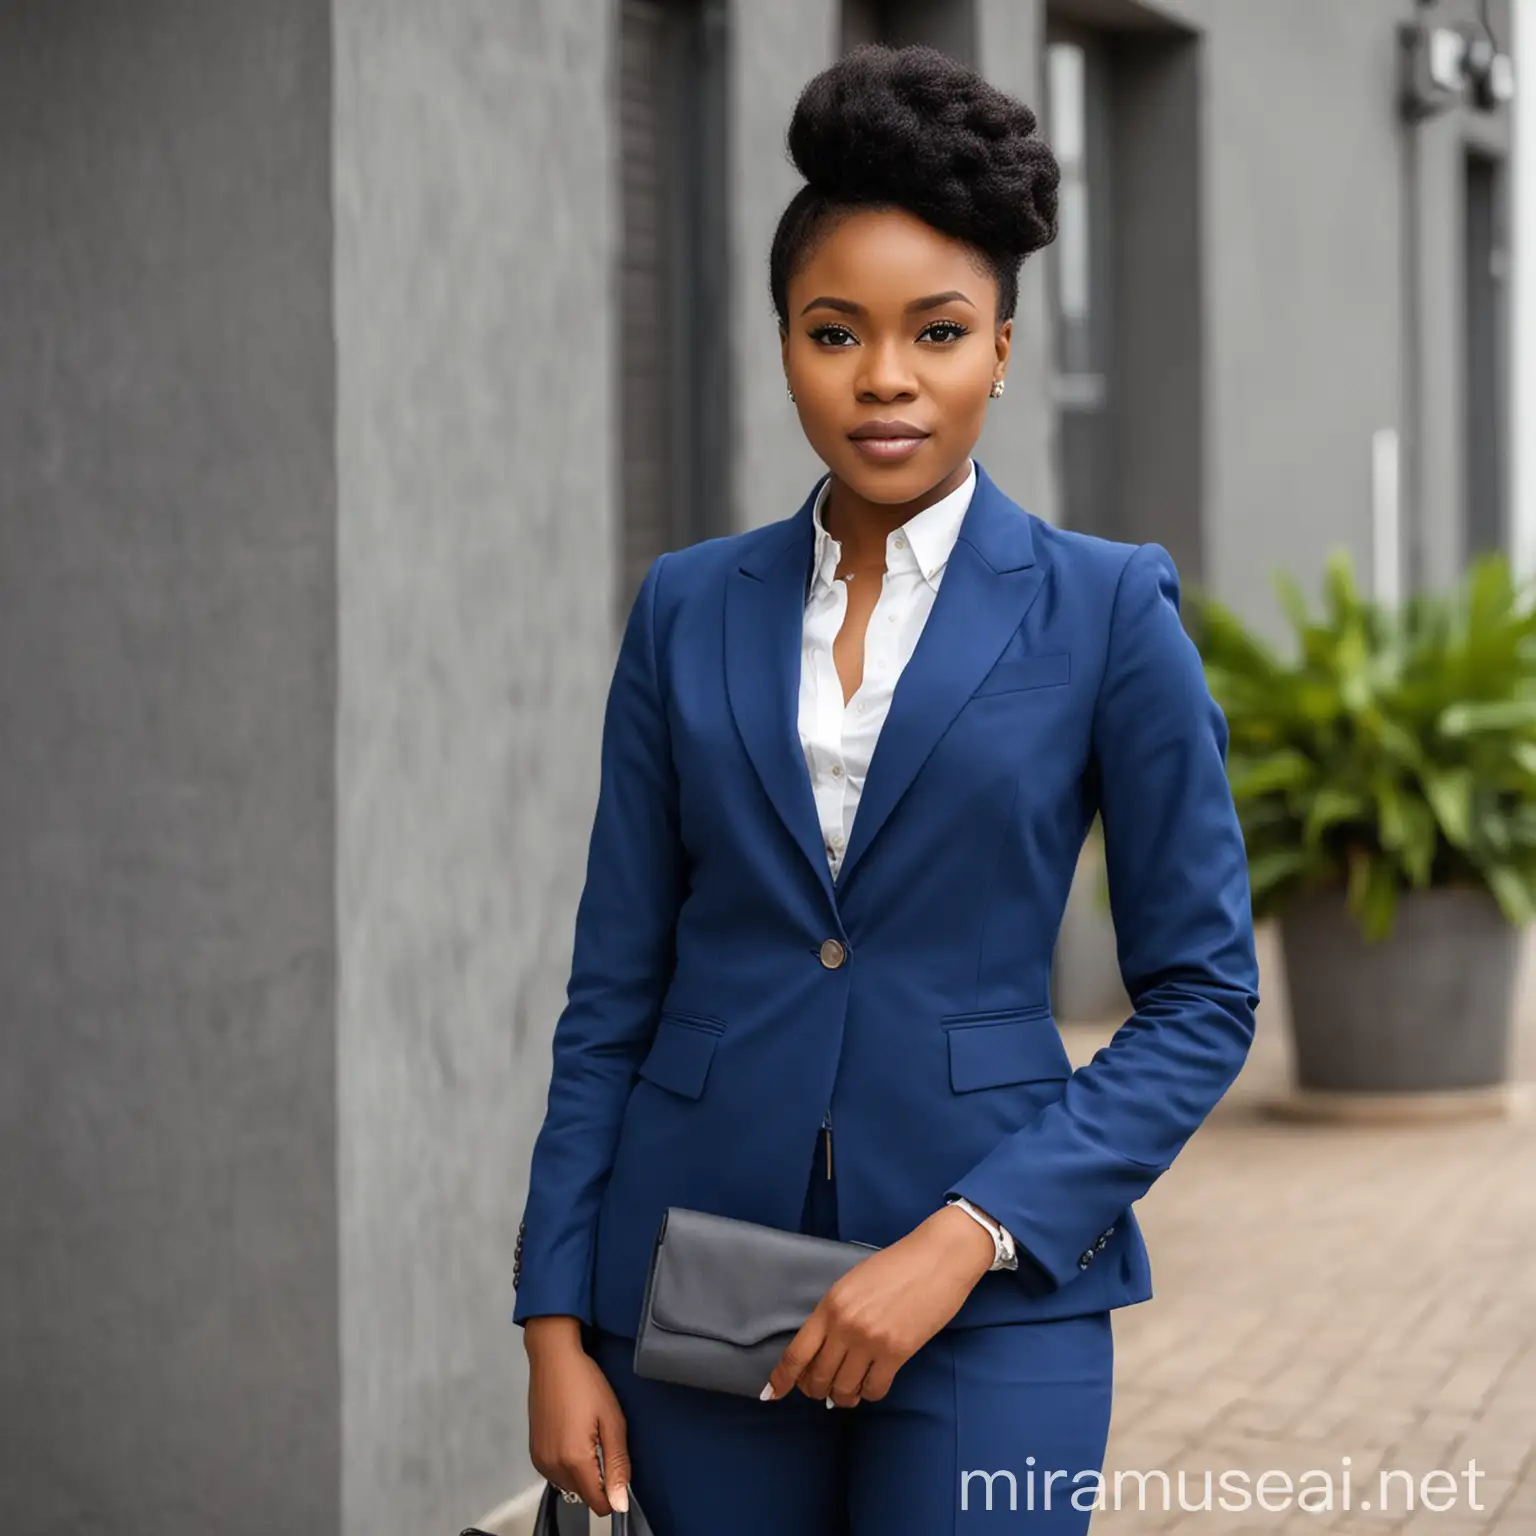 A PROFESSIONAL LADY IN NIGERIAN WITH  NATURAL COLOR AND WITH BLUE SUIT  

